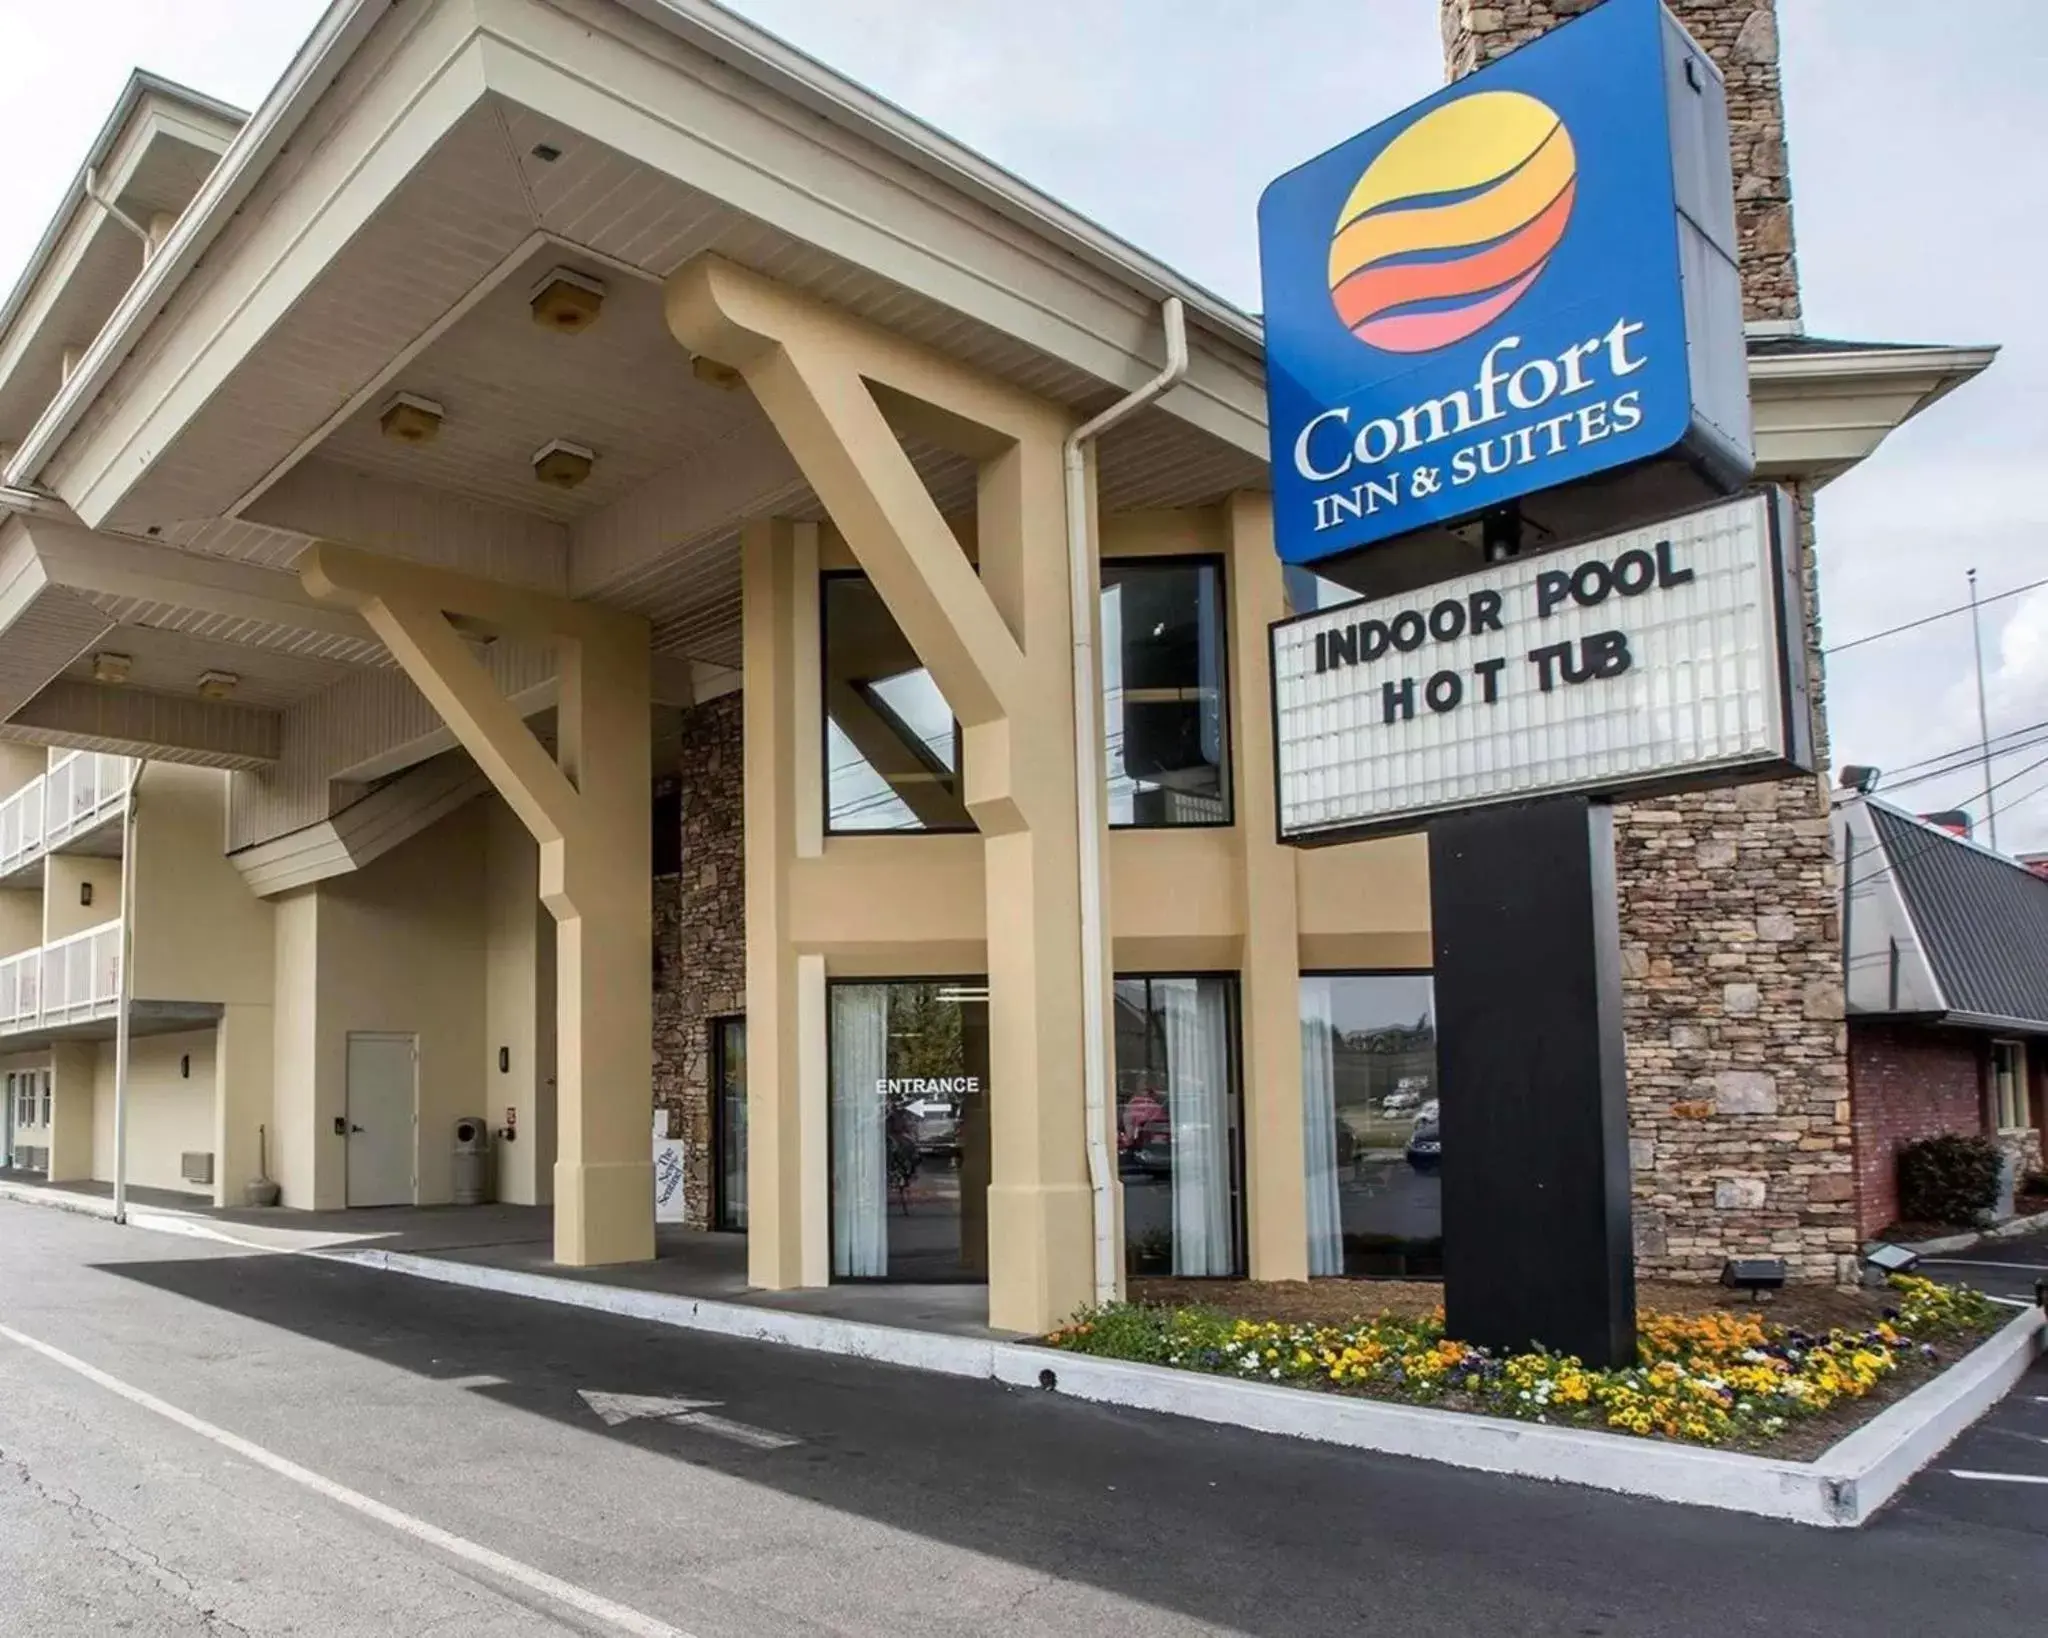 Property building in Comfort Inn & Suites at Dollywood Lane